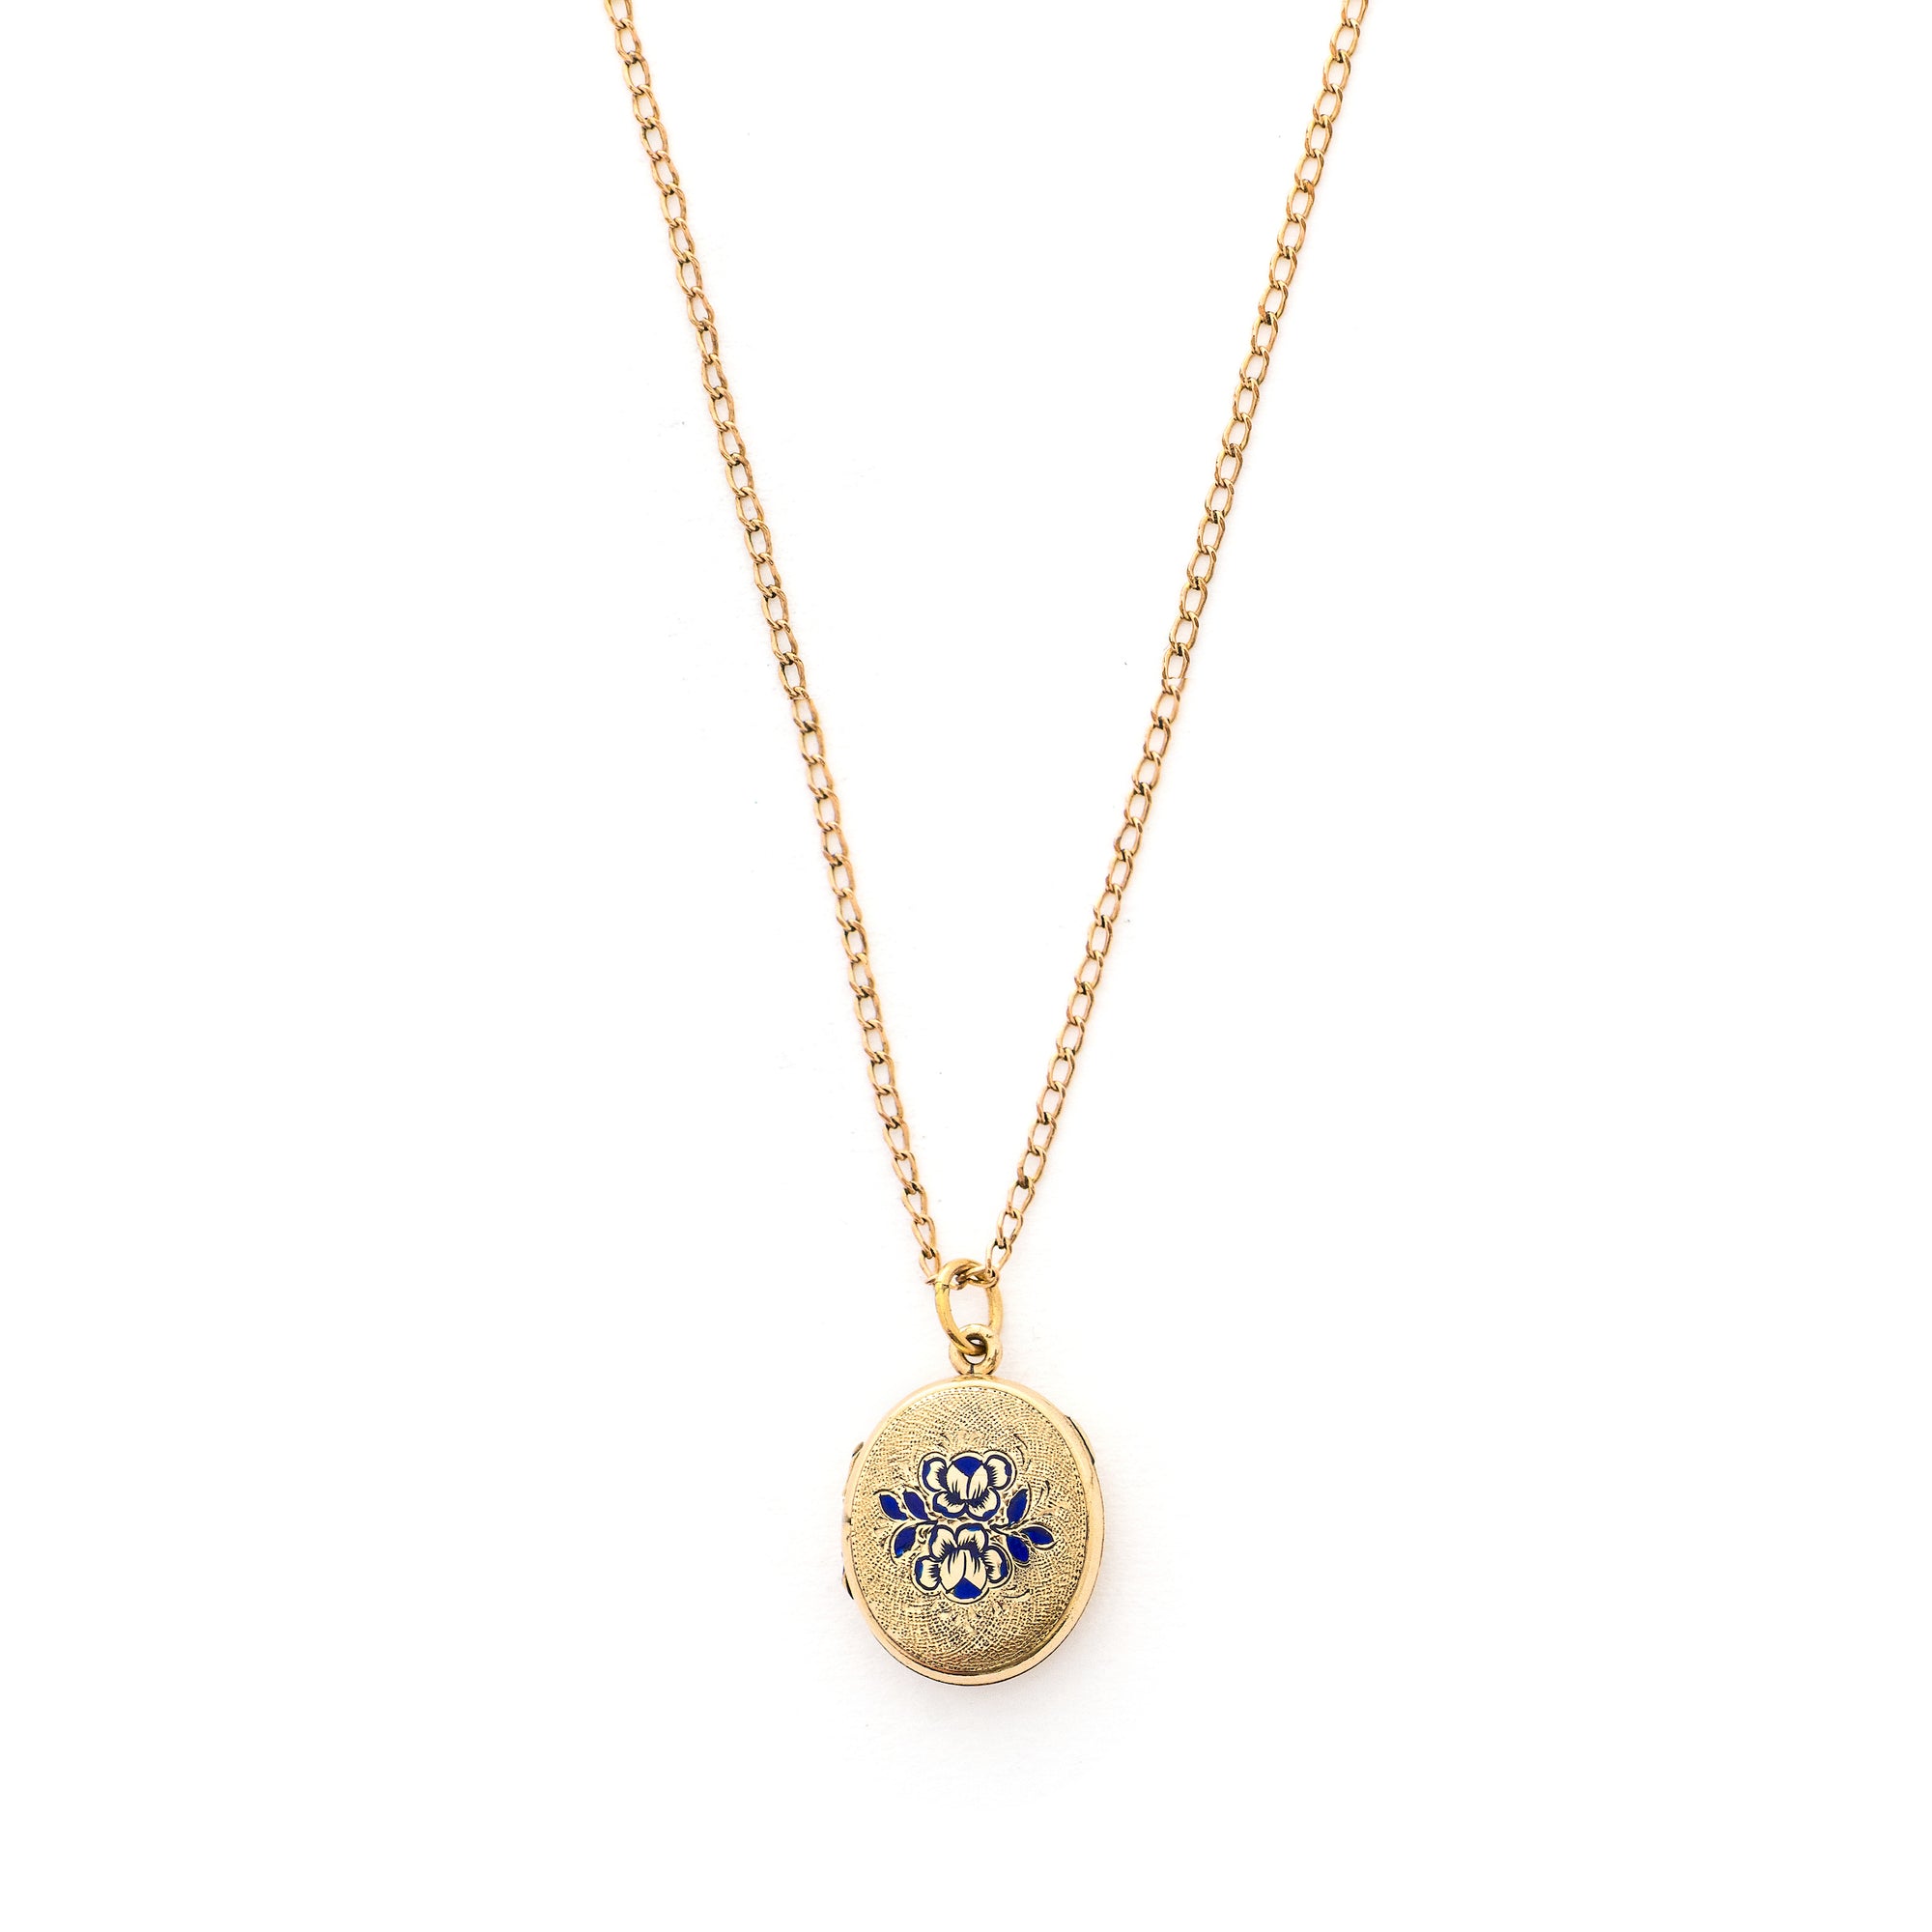 This sweet oval locket features a delicate rose design with navy blue enamel set on a finely textured background. The initials BBG are inscribed on the back. It opens to hold two photos, includes one original frame and glass and pairs perfectly with one of our antique gold fill chains.  Front locket view